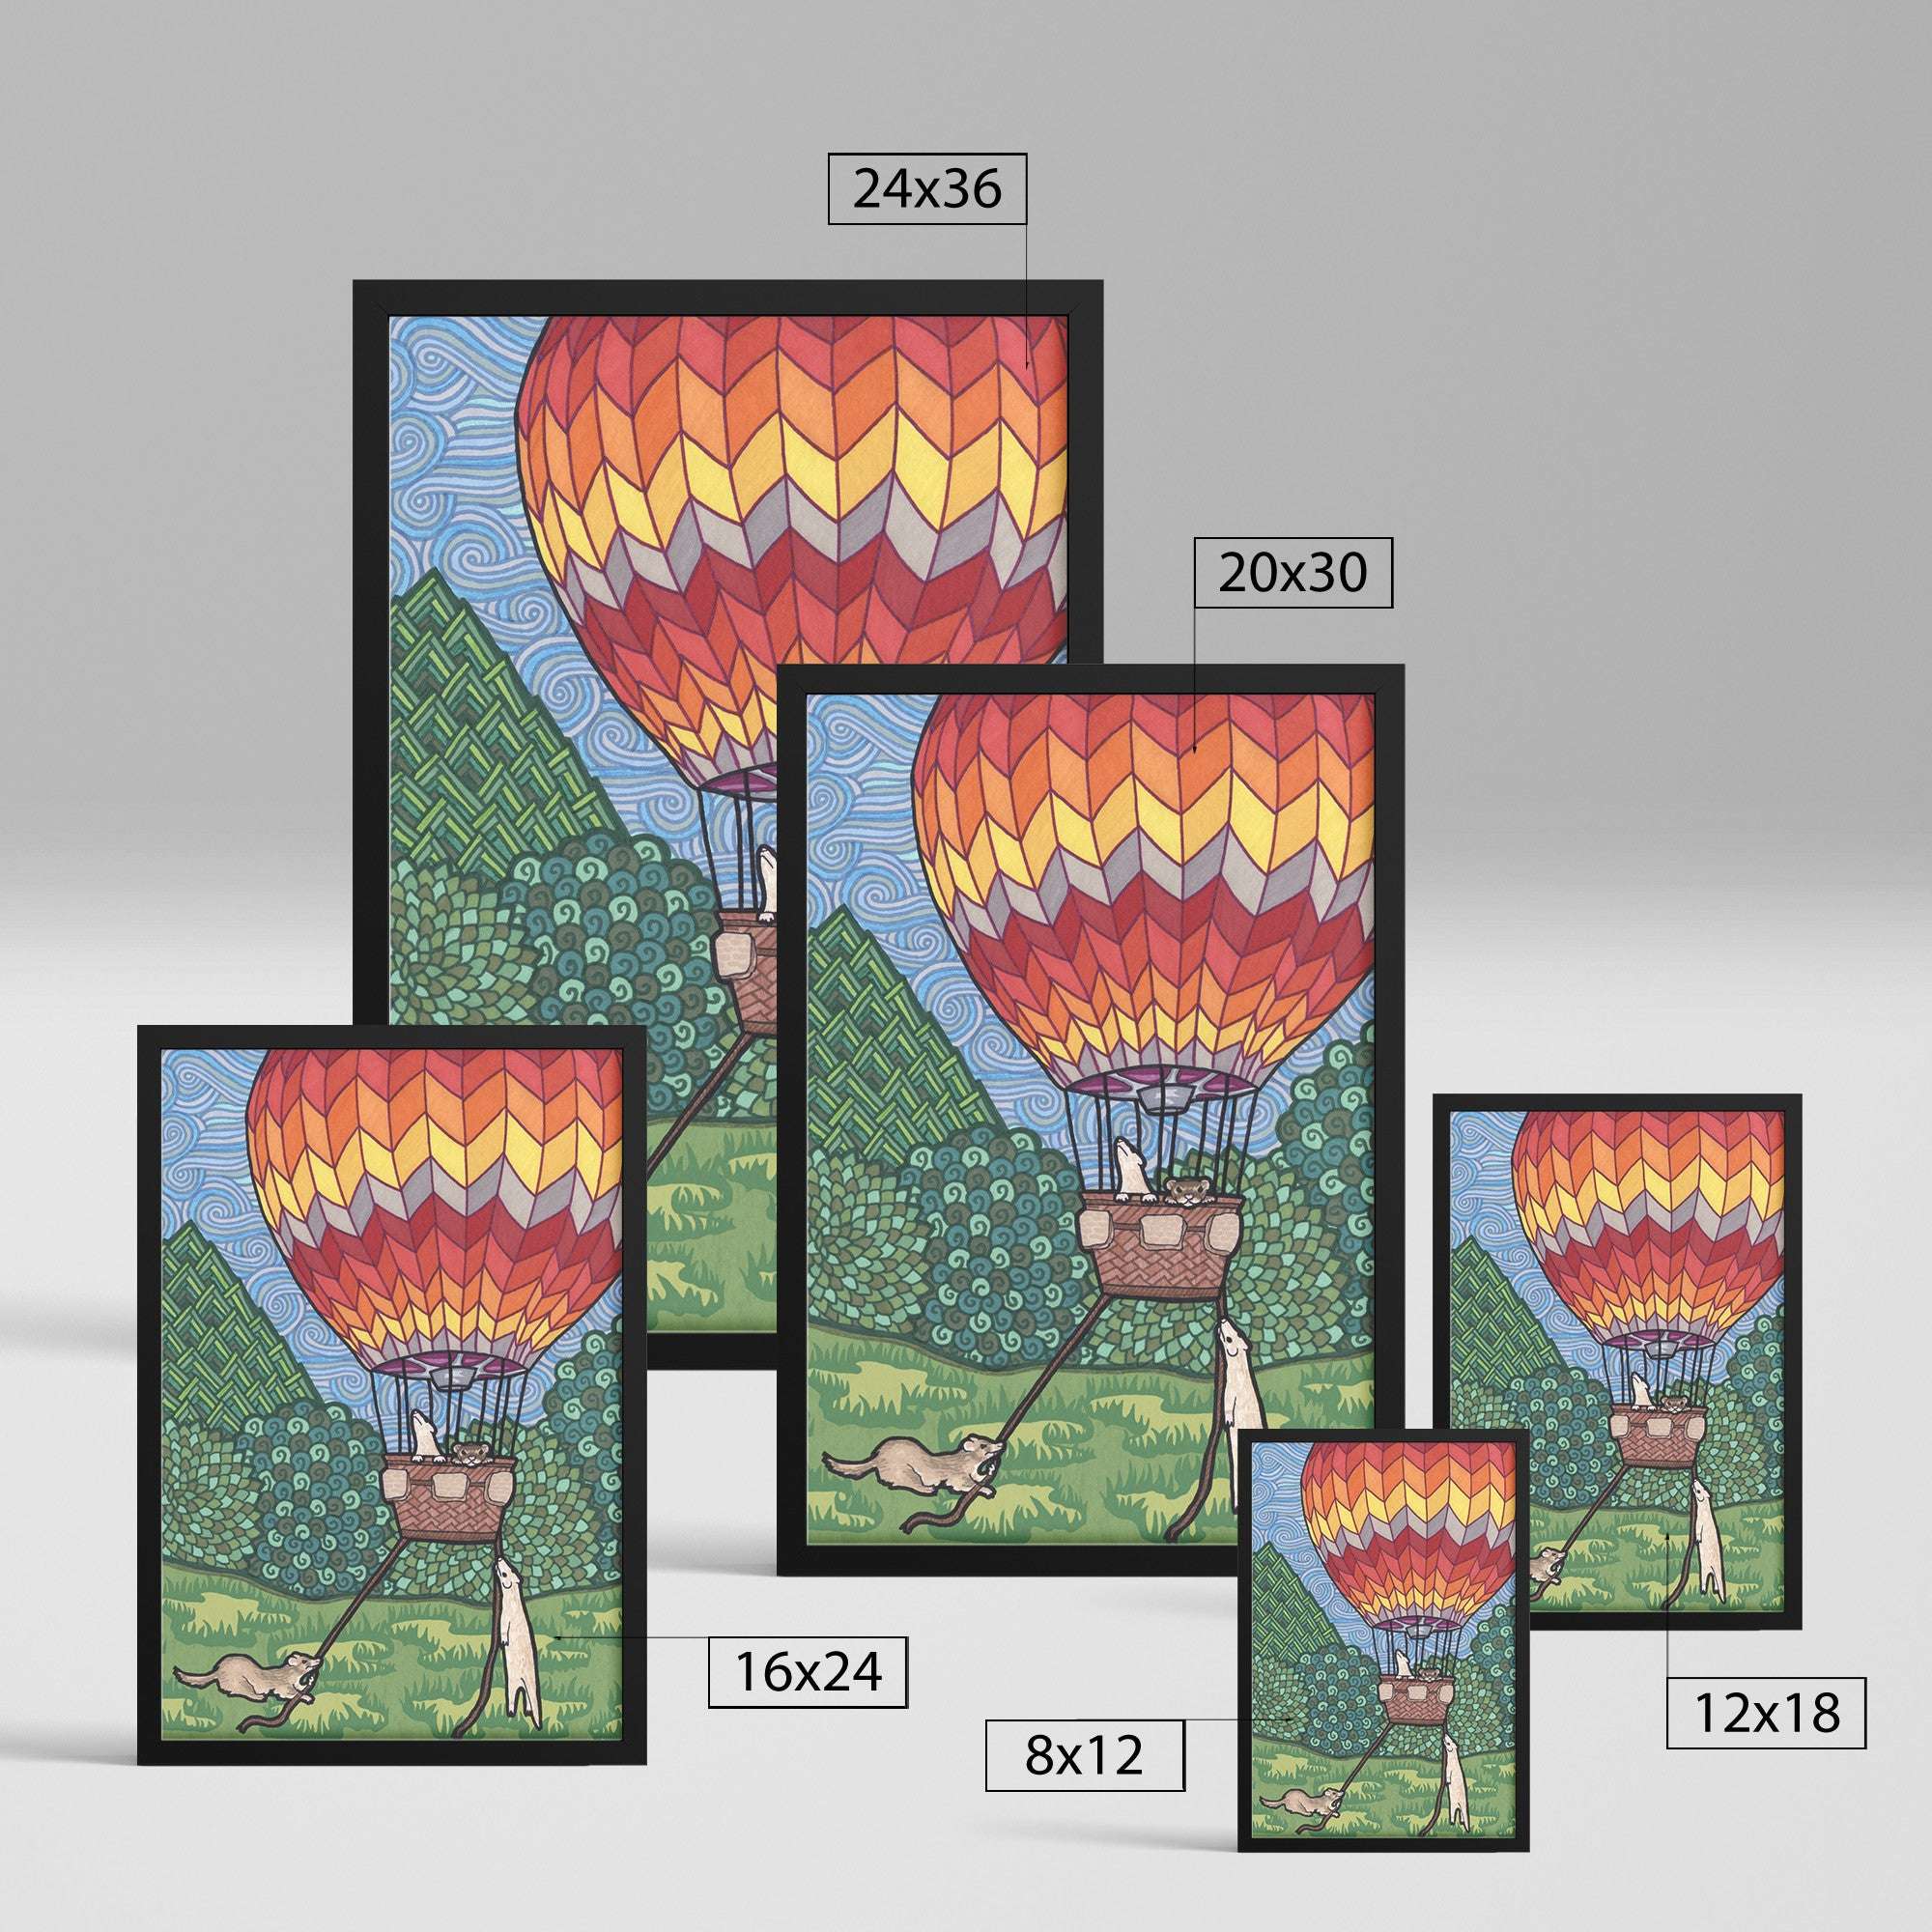 Variety of Ferret Flight Framed Prints featuring ferrets in a colorful hot air balloon over a scenic landscape, displayed in different sizes on a light background.